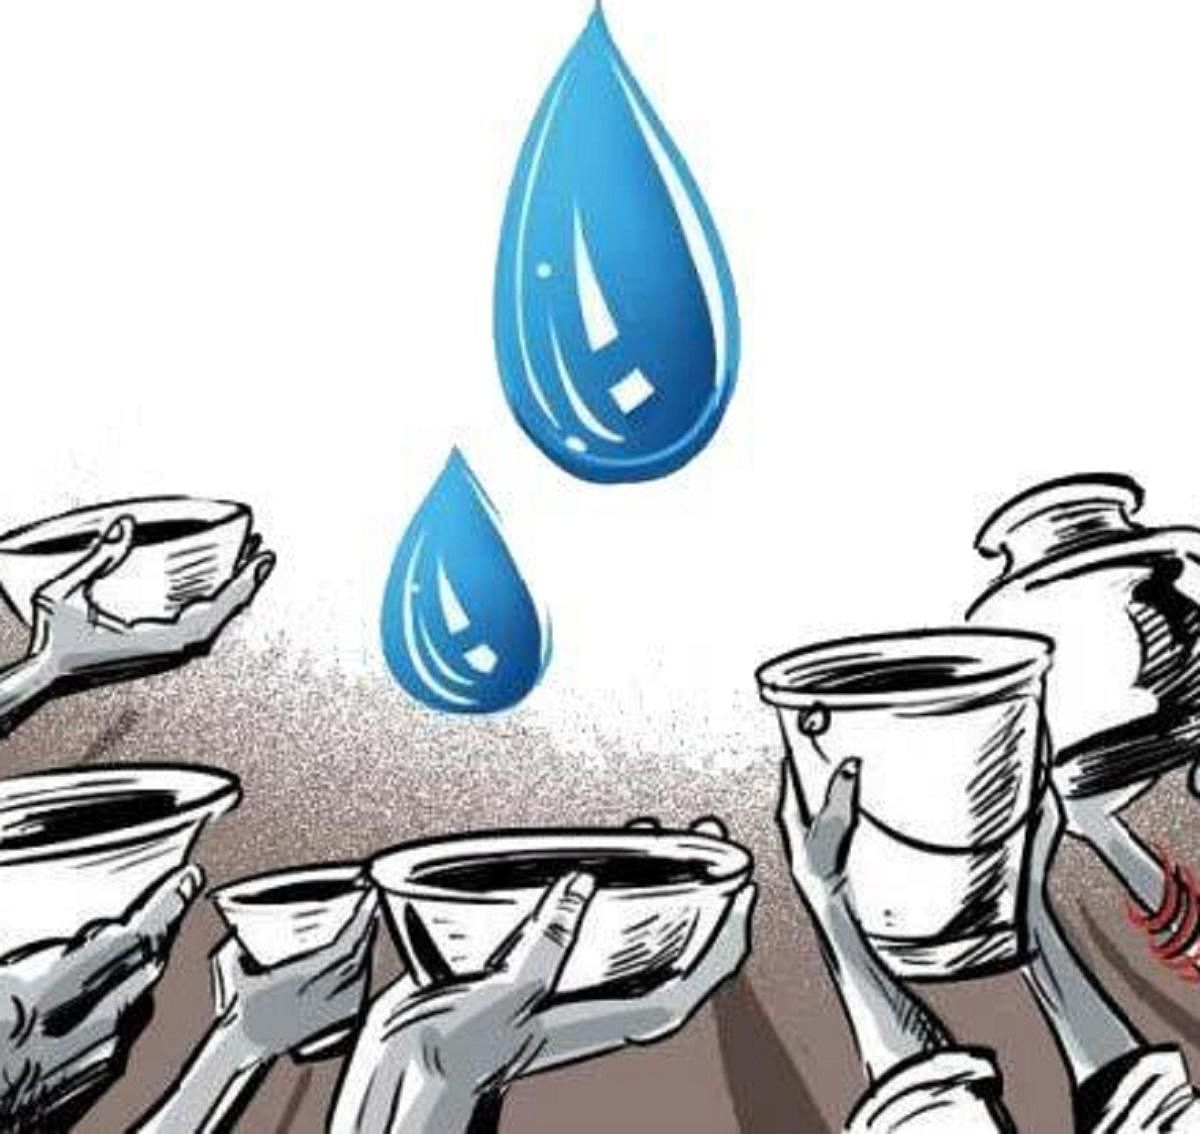 Jal Jeevan Mission to provide piped water to rural home